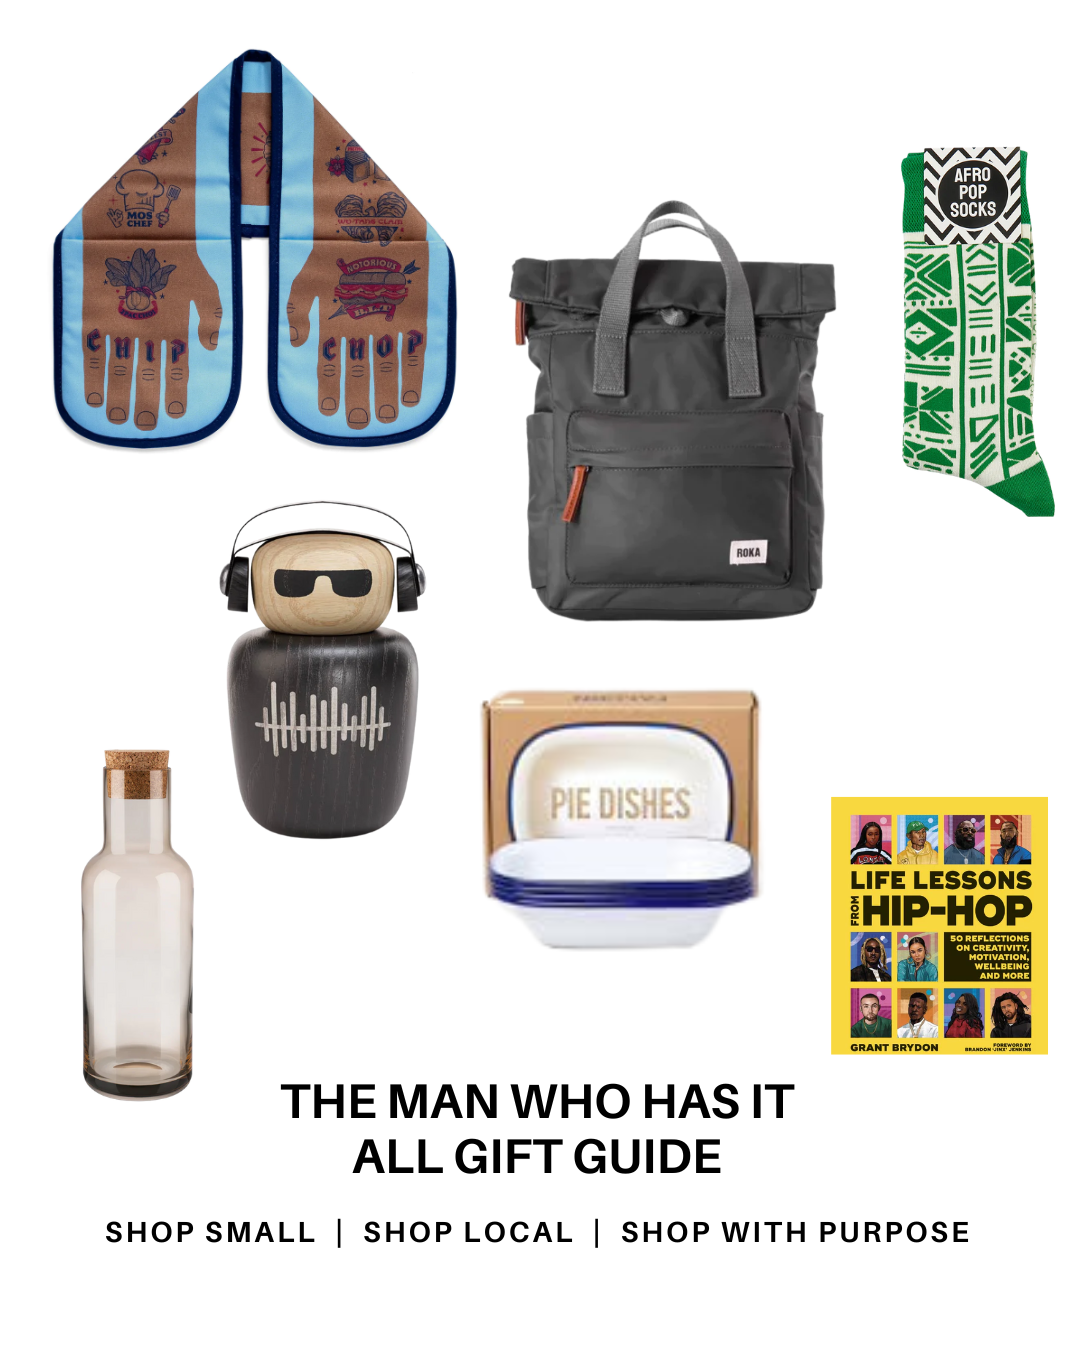 Copy of THE MAN WHO HAS IT ALL gift guide Post.png